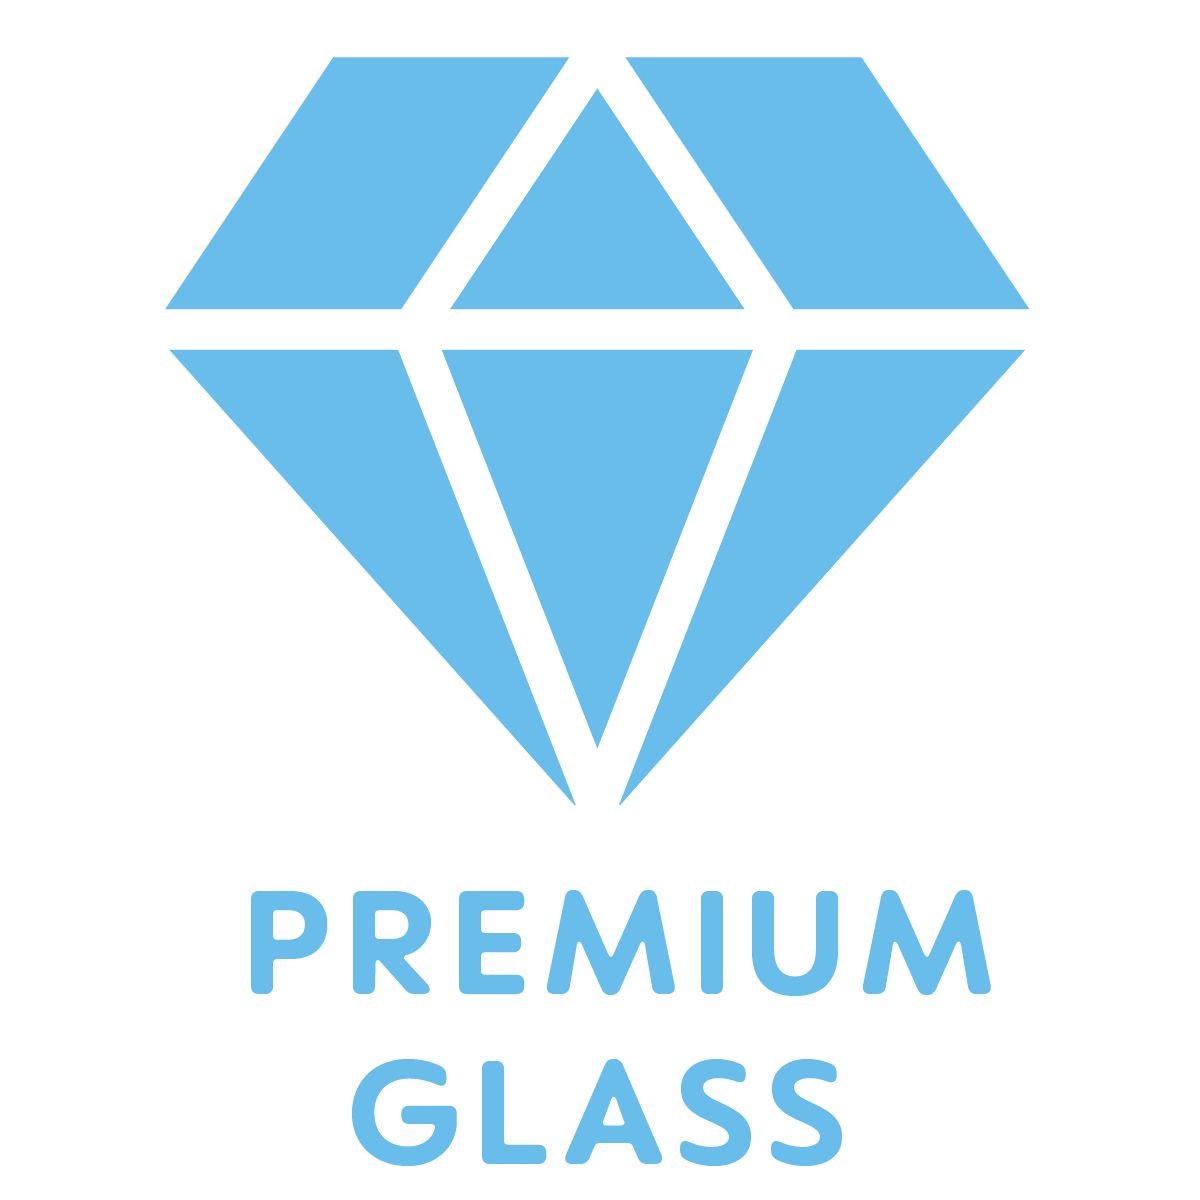 This product is made of premium glass